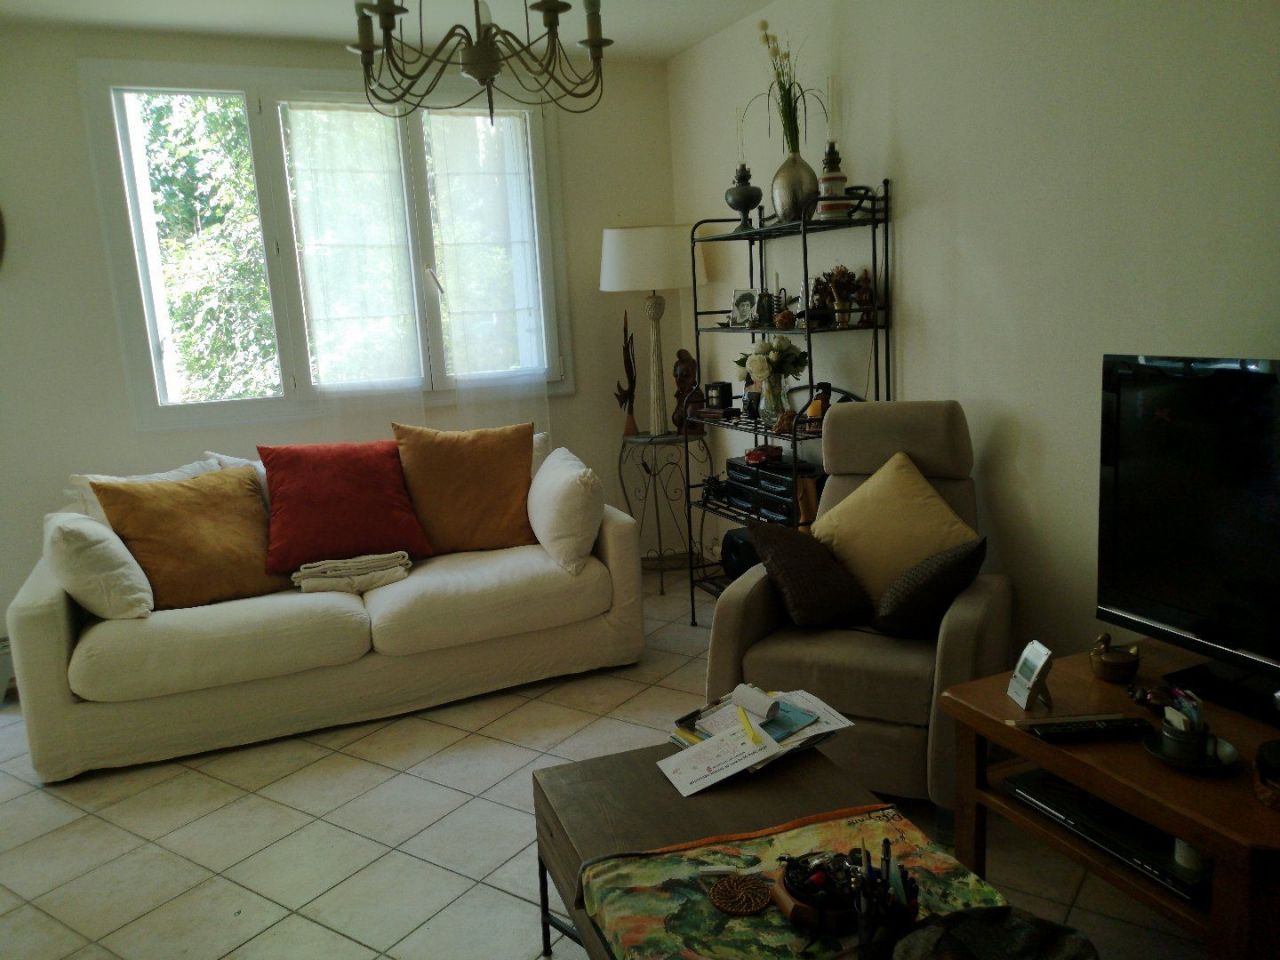 Apartment in Marseille, France - picture 1